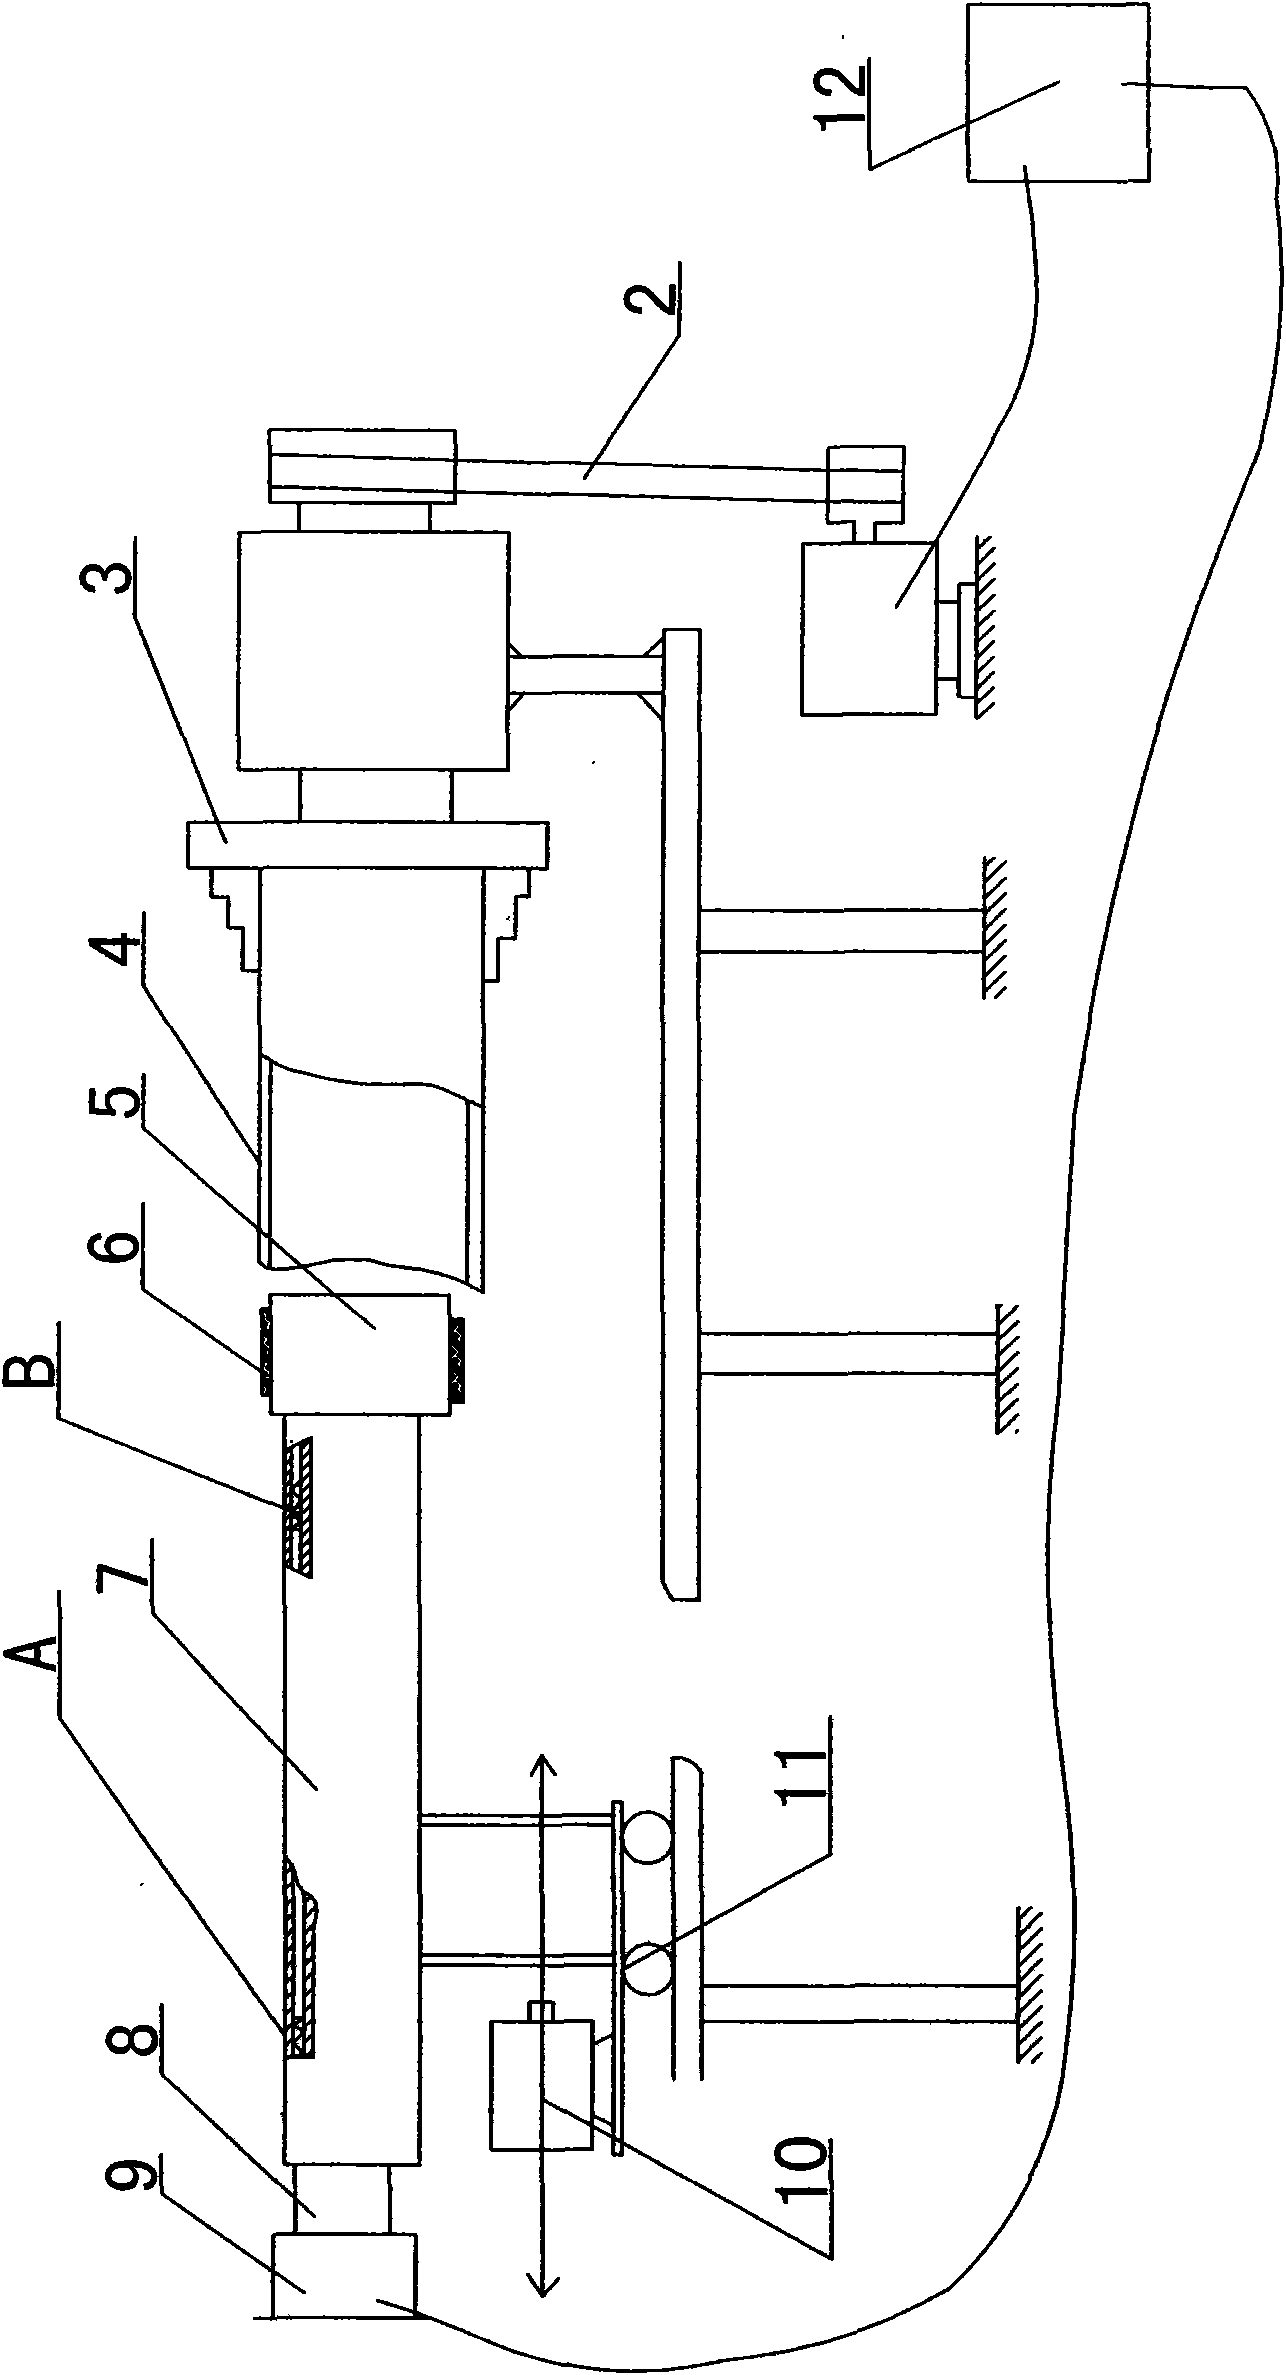 Digital control horizontal honing machine and honing method for realizing control of grinding force